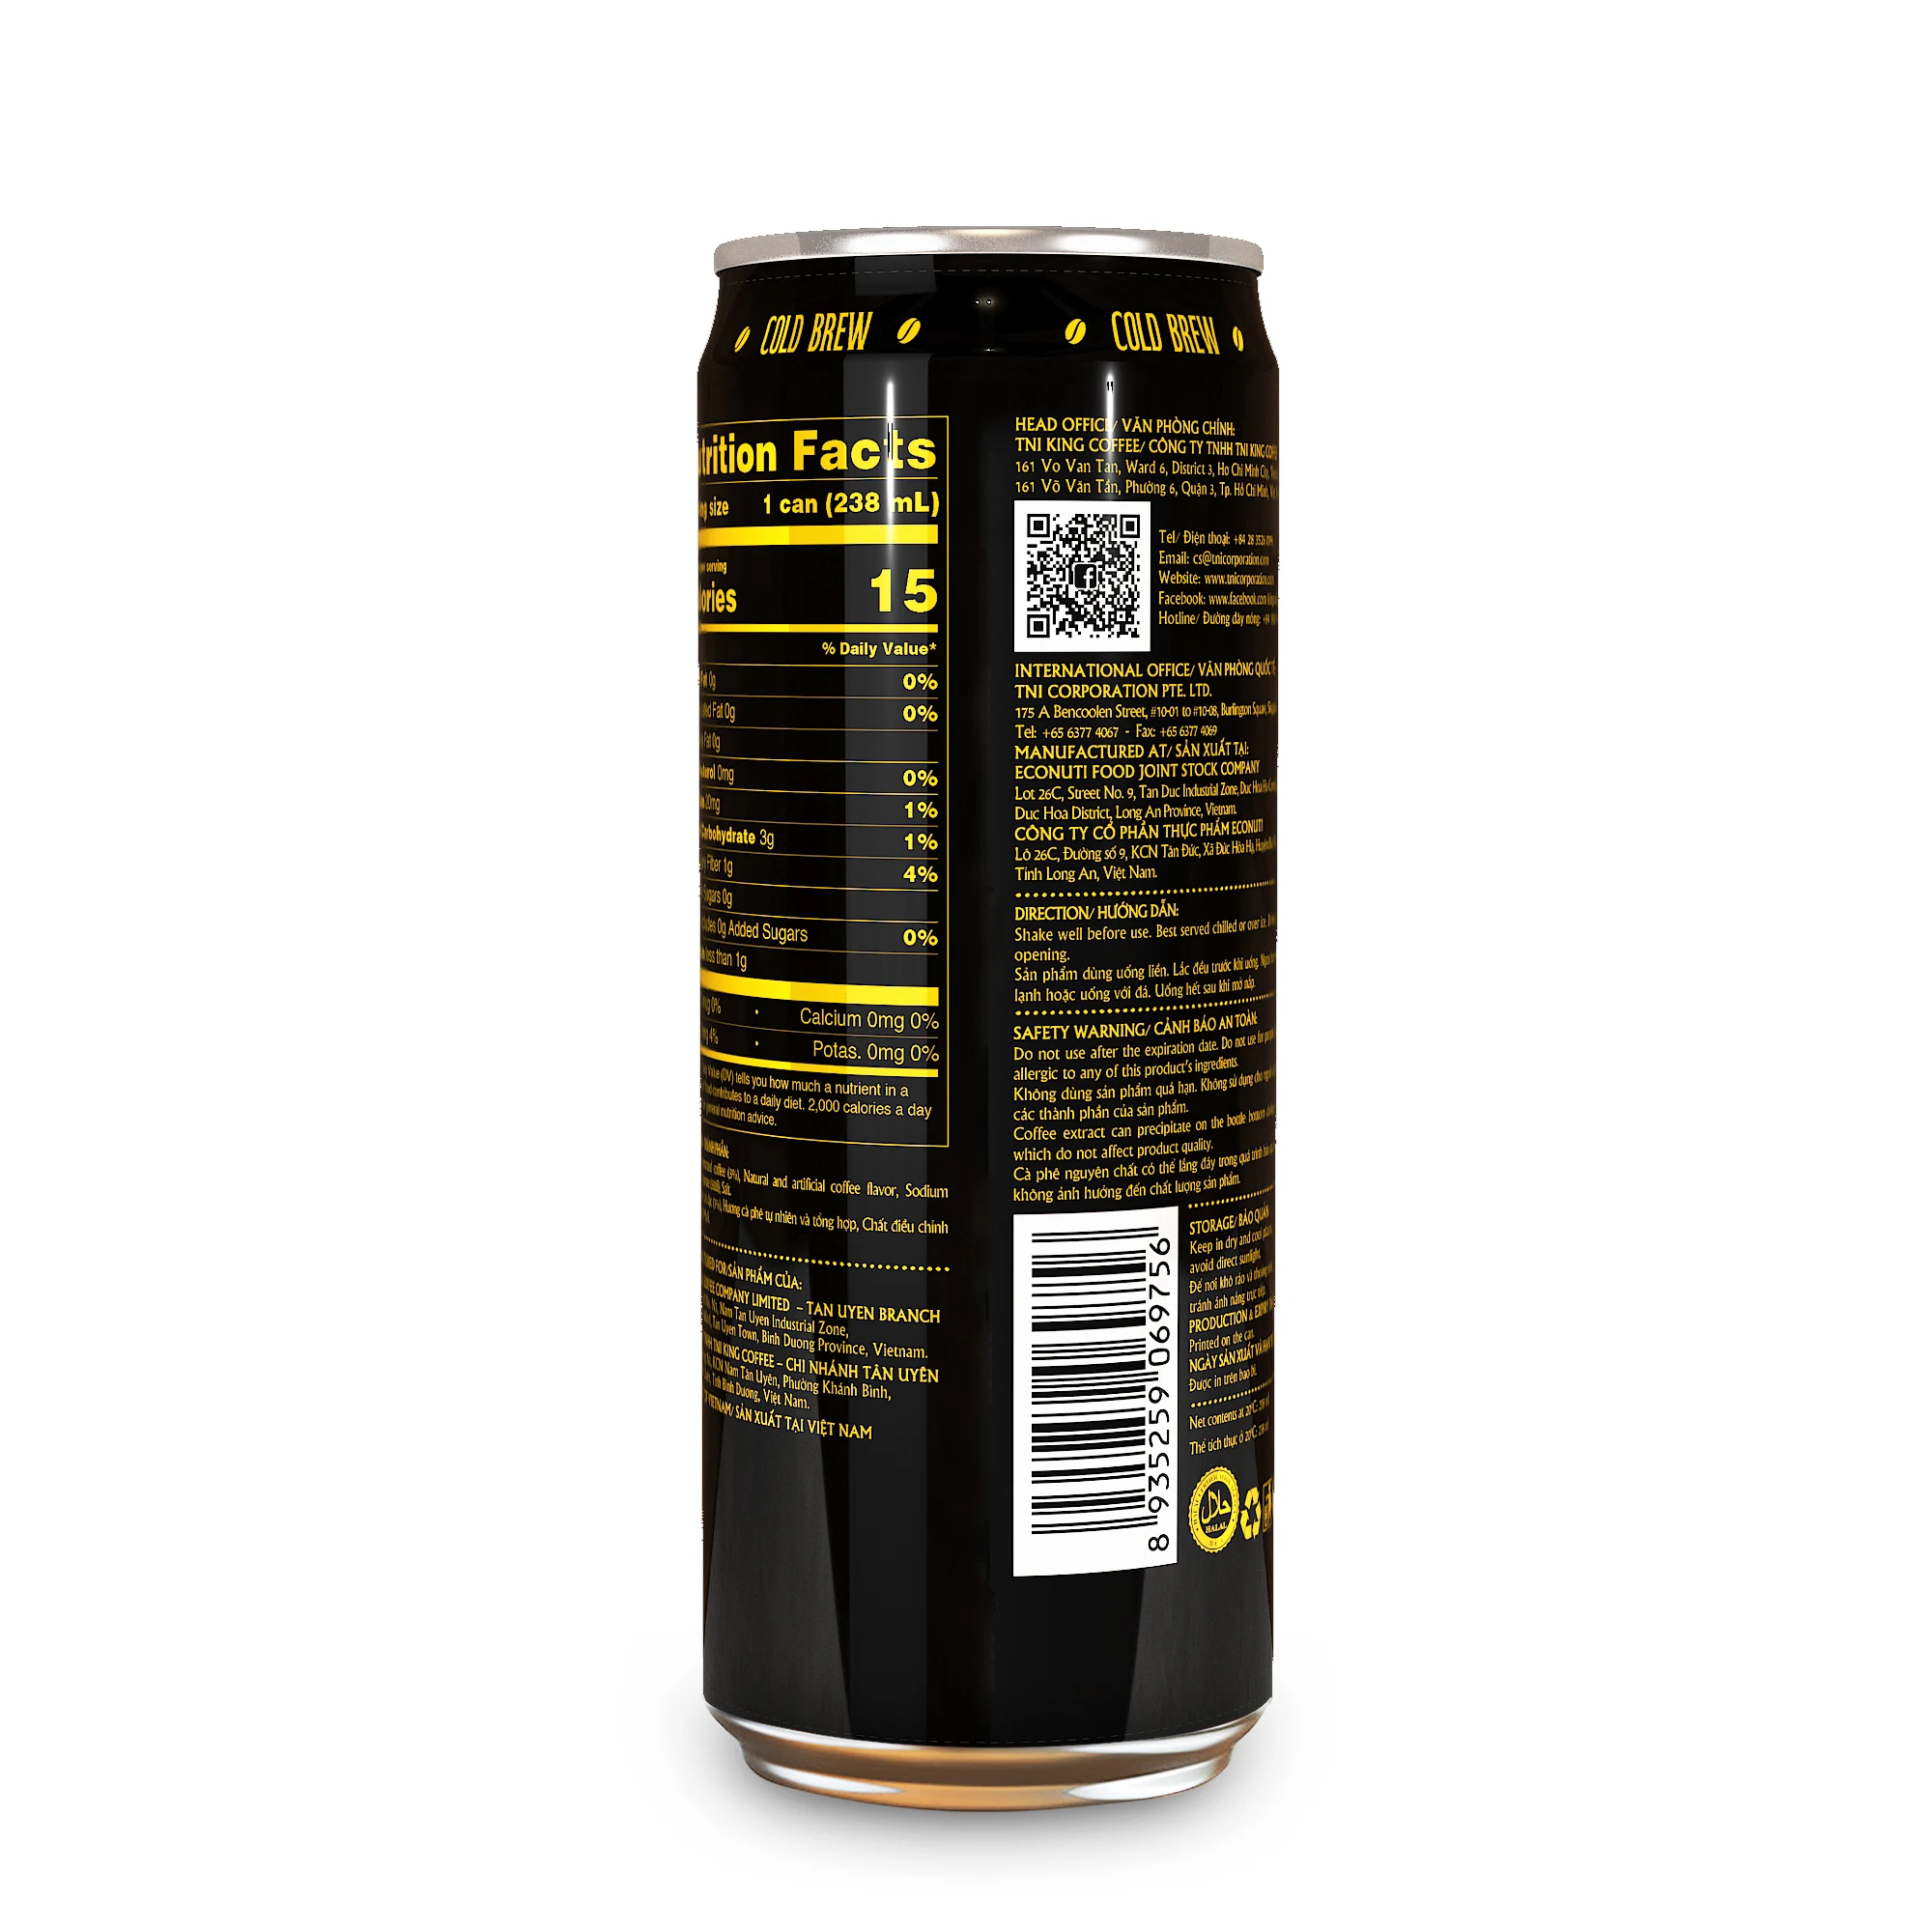 KING COFFEE - (RTD) Cold Brew Black Coffee Can 238 ml packed in 24 can per box from Top Vietnamese Coffee Brand